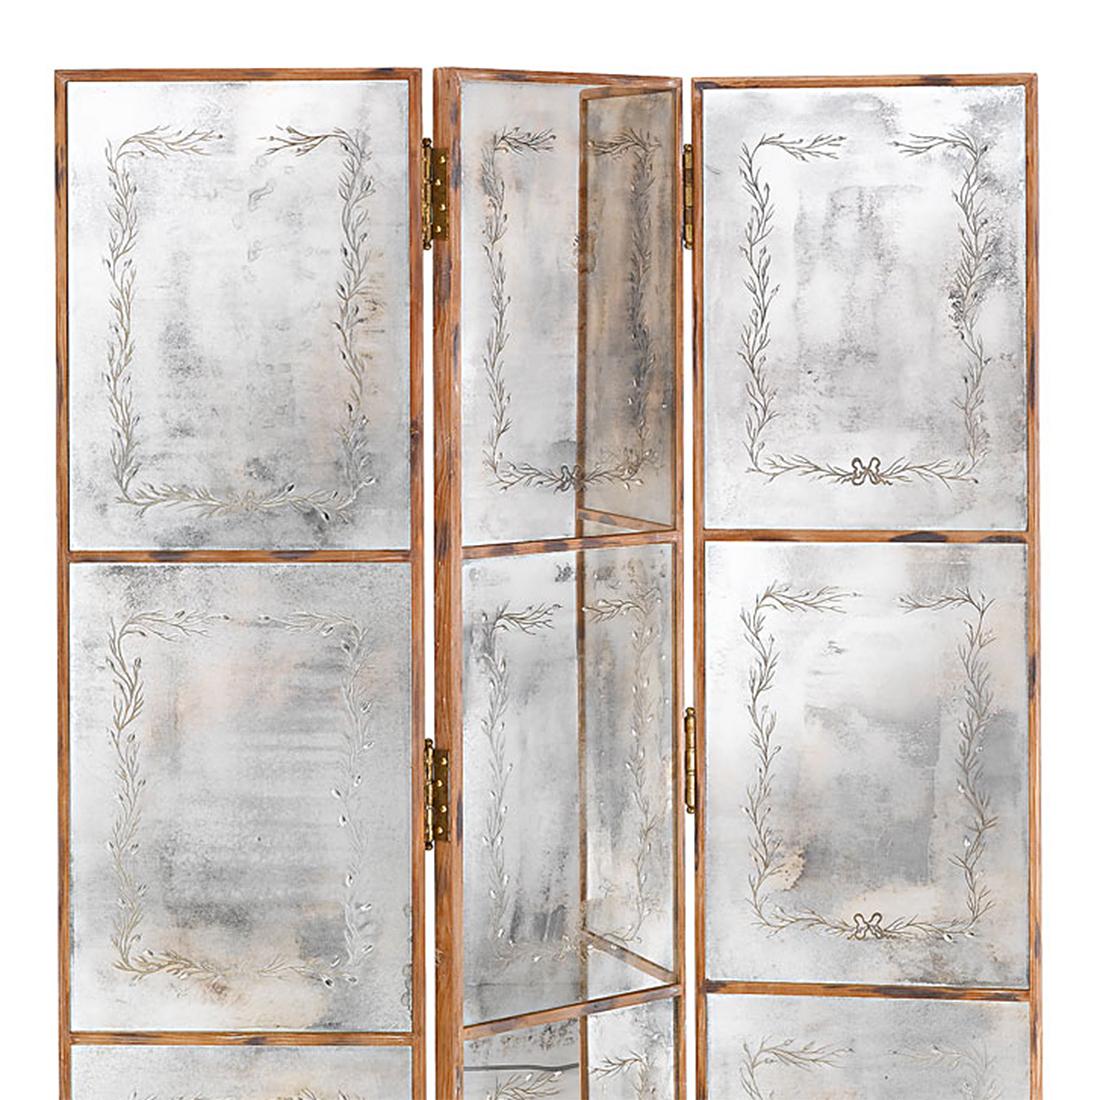 Screen Twiggy with three panels structure made of with solid wood,
back-side and frames in solid wood, with six hinges in solid brass in 
vintage finish. Each panel is covered with engraved glass tiles in mirrored
antique finish. 
Each Panel: